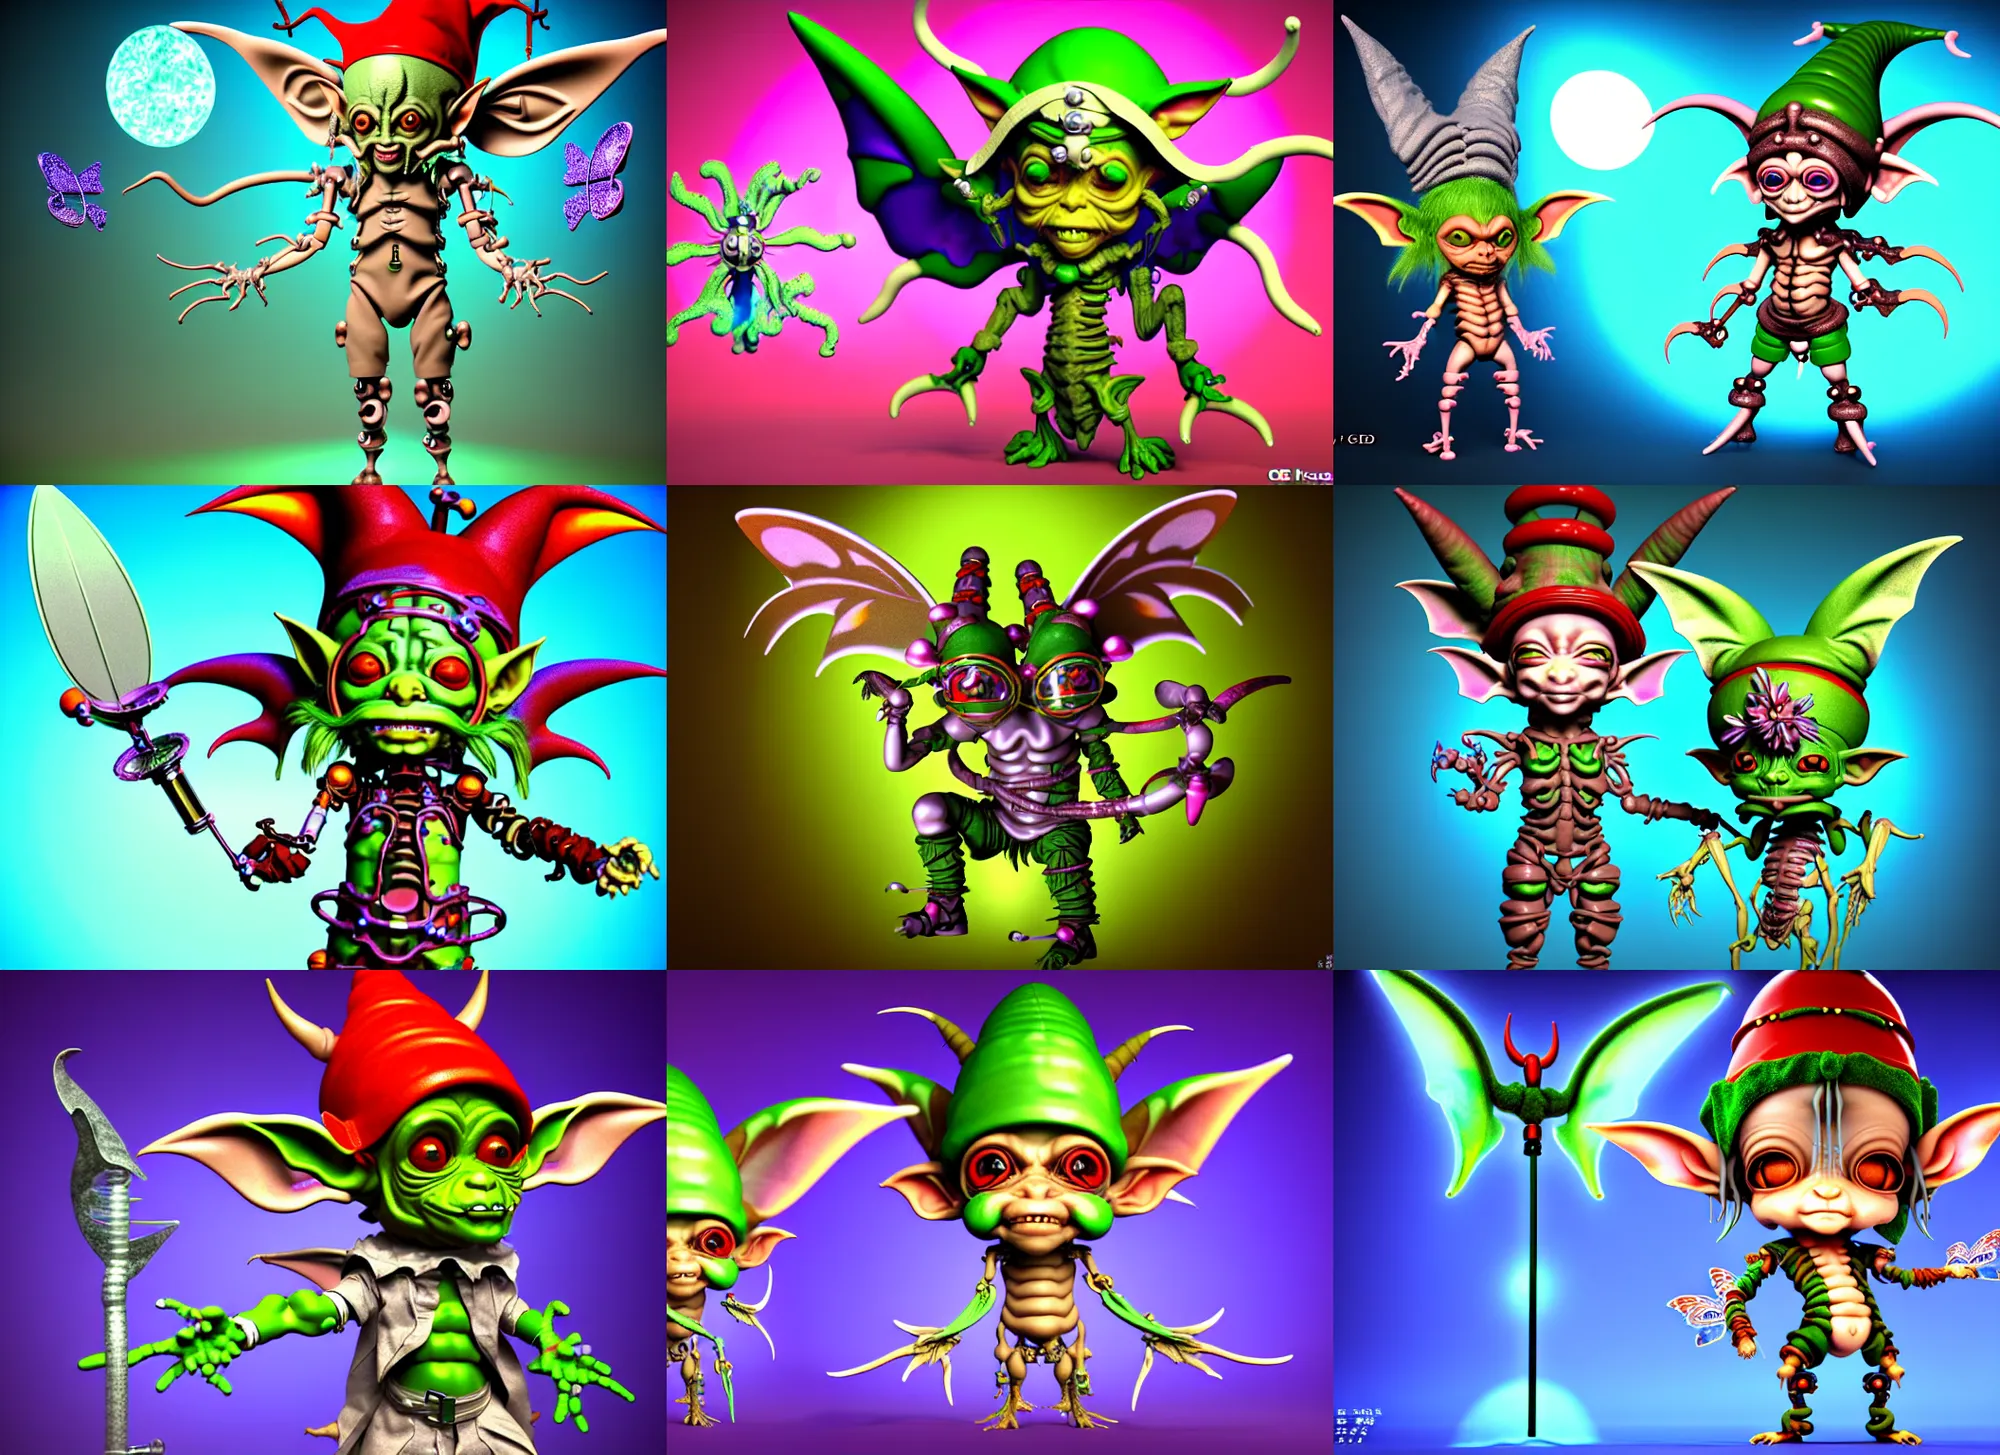 Prompt: 3 d render of chibi cyborg surgeon goblin elf by ichiro tanida wearing a big jester hat and wearing angel wings against a psychedelic swirly background with 3 d butterflies and 3 d flowers, holistic medicine, arabic hong kong ad, in the style of 1 9 9 0's cg graphics 3 d rendered y 2 k aesthetic by ichiro tanida, 3 do magazine